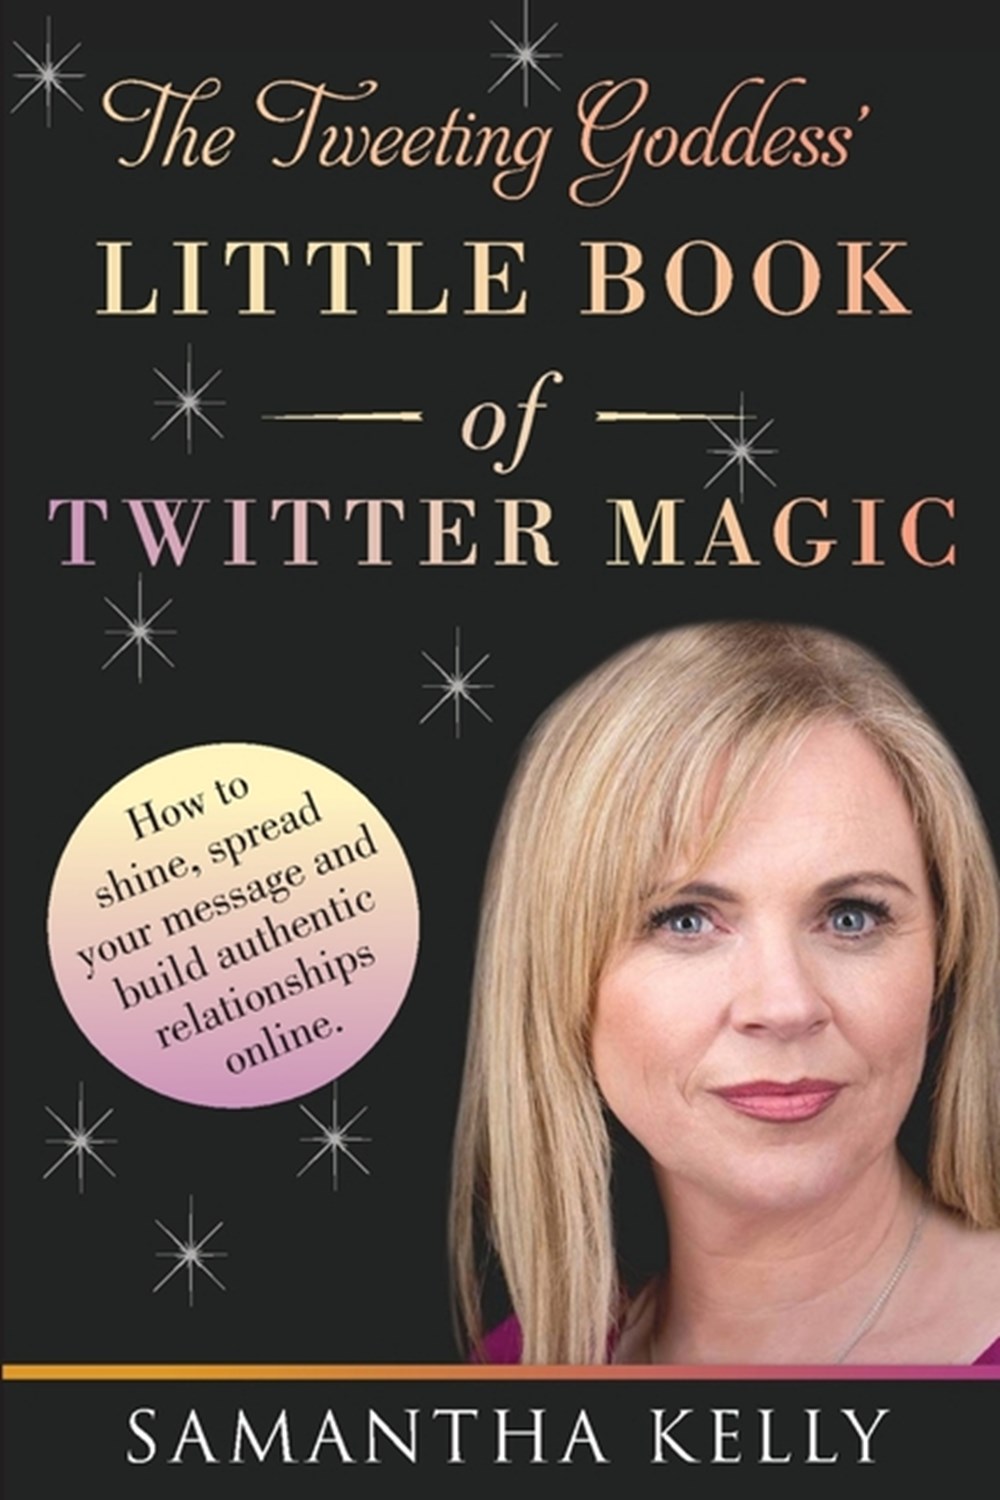 Tweeting Goddess Little Book Of Twitter Magic How to shine, spread your message and build authentic 